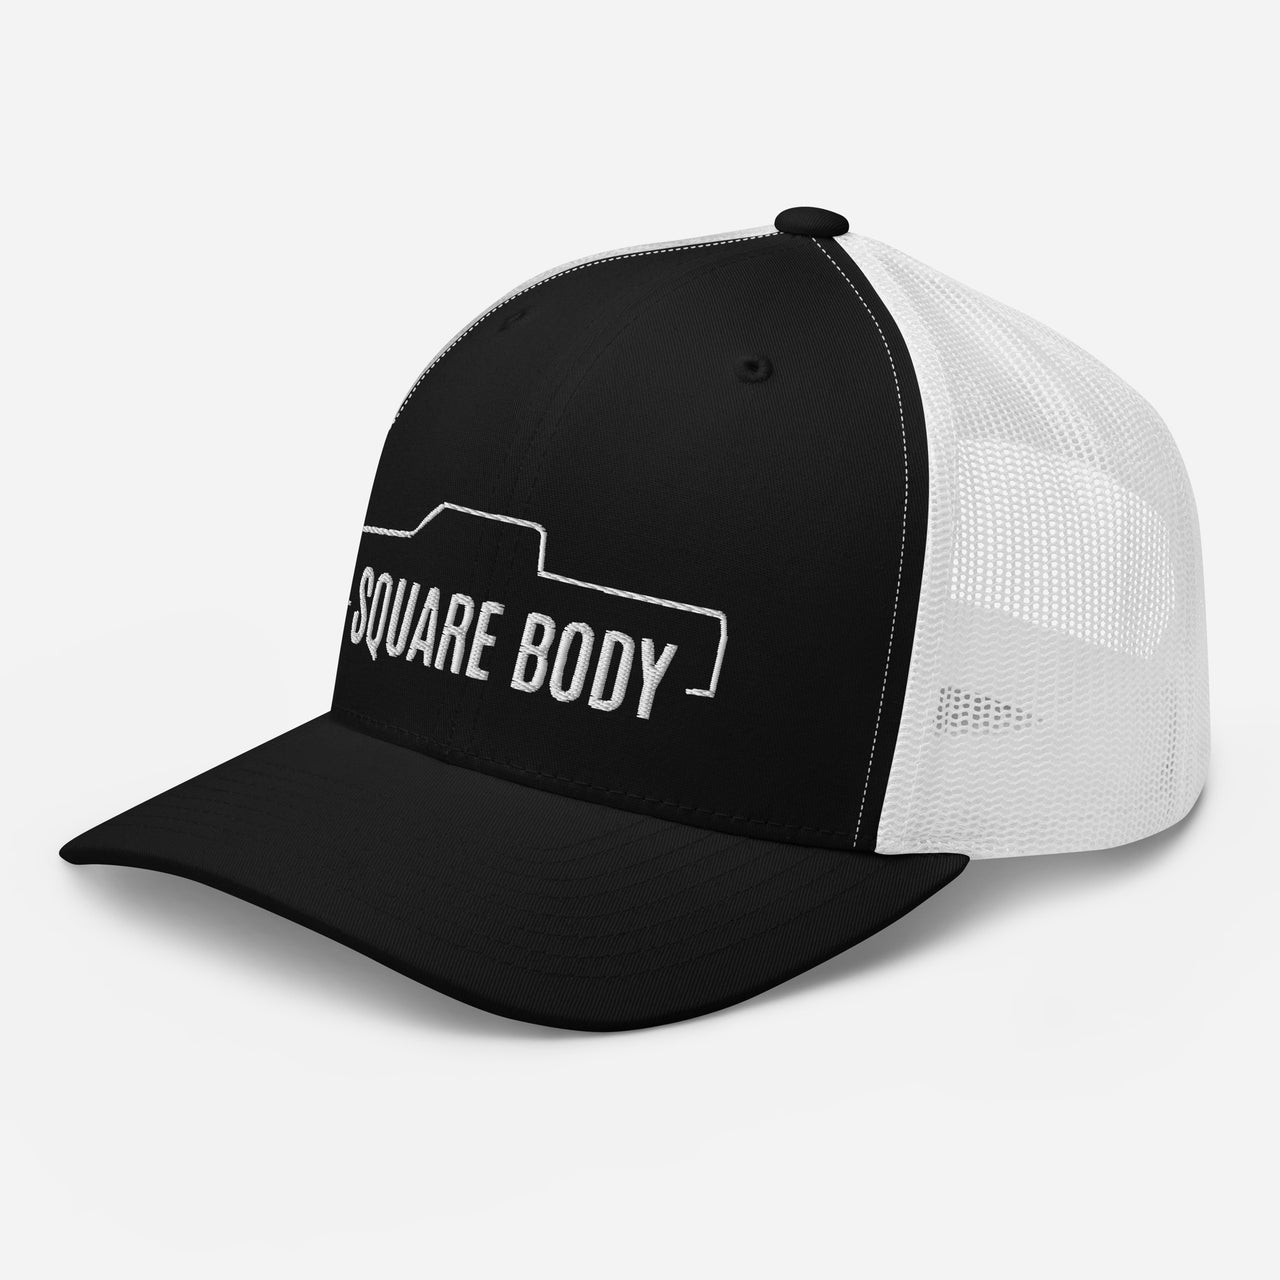 3/4 view of Crew Cab Square Body Trucker Hat From Aggressive Thread in Black and white